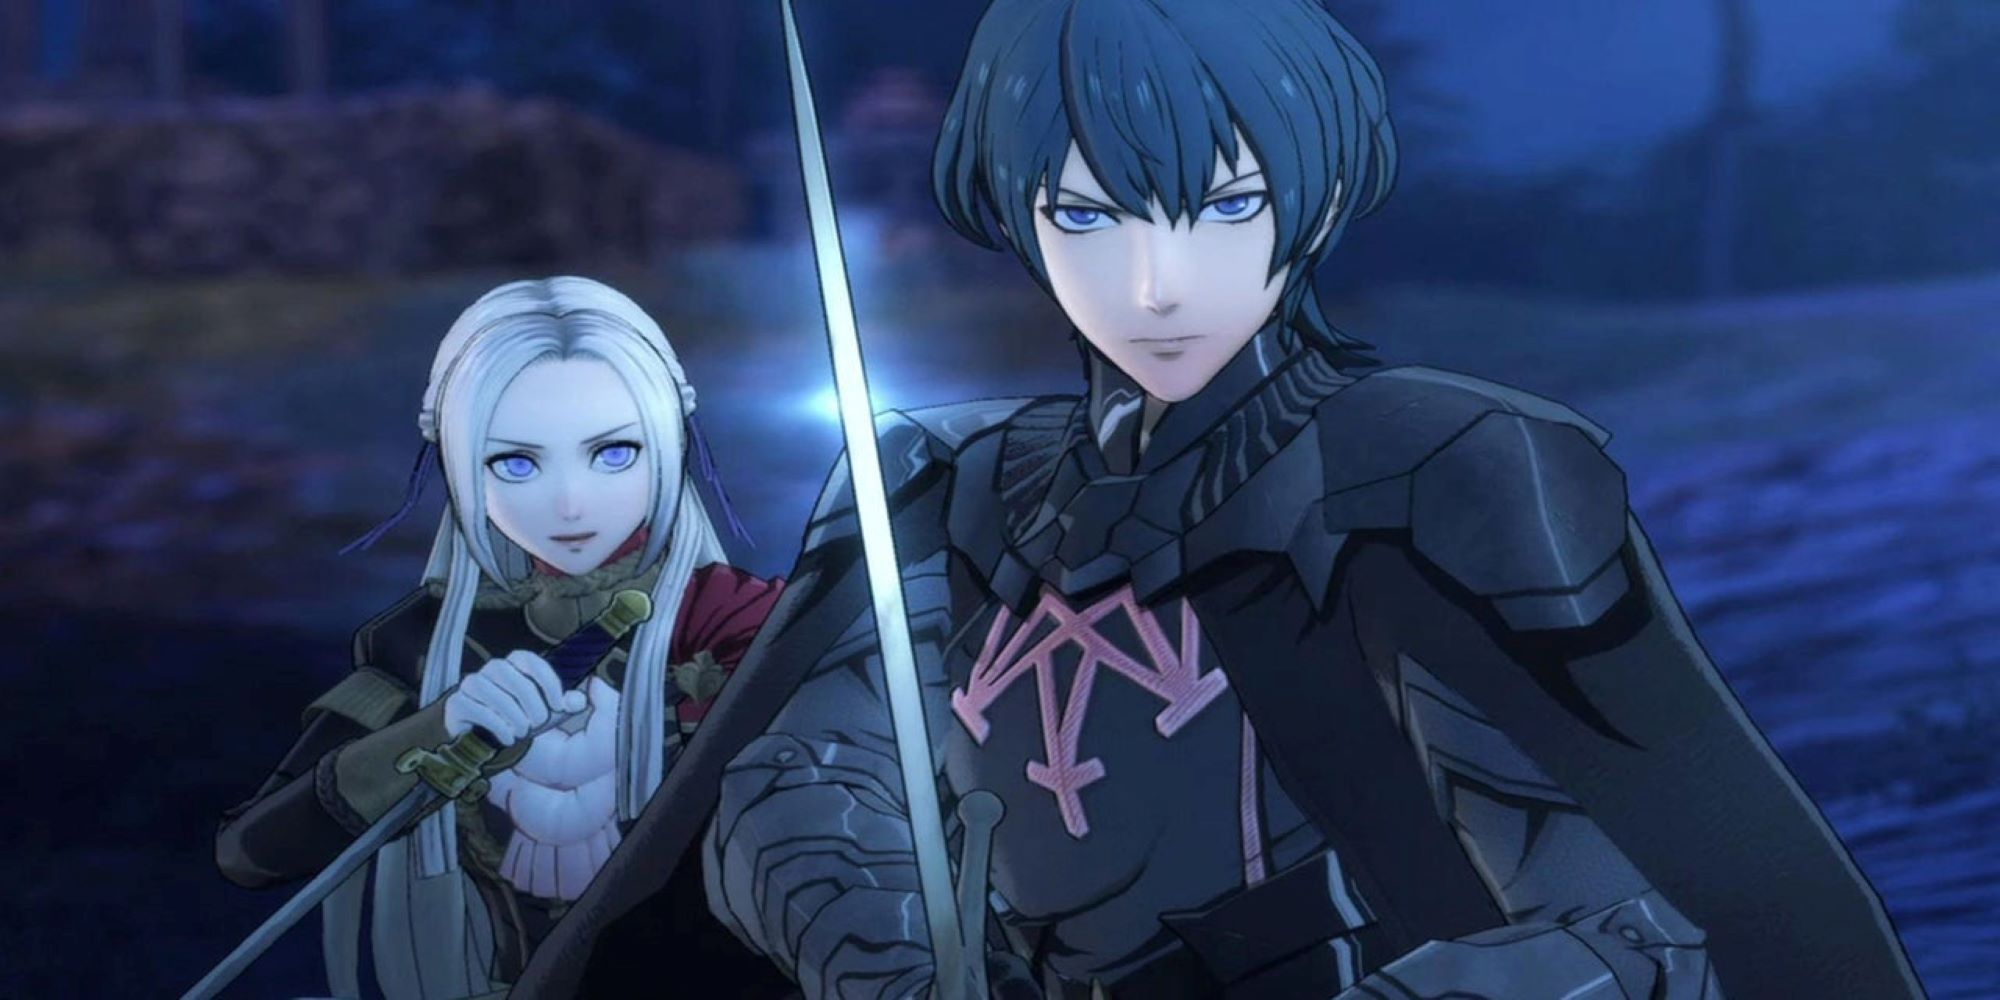 Byleth and Edelgard from Fire Emblem: Three Houses looking ready for battle